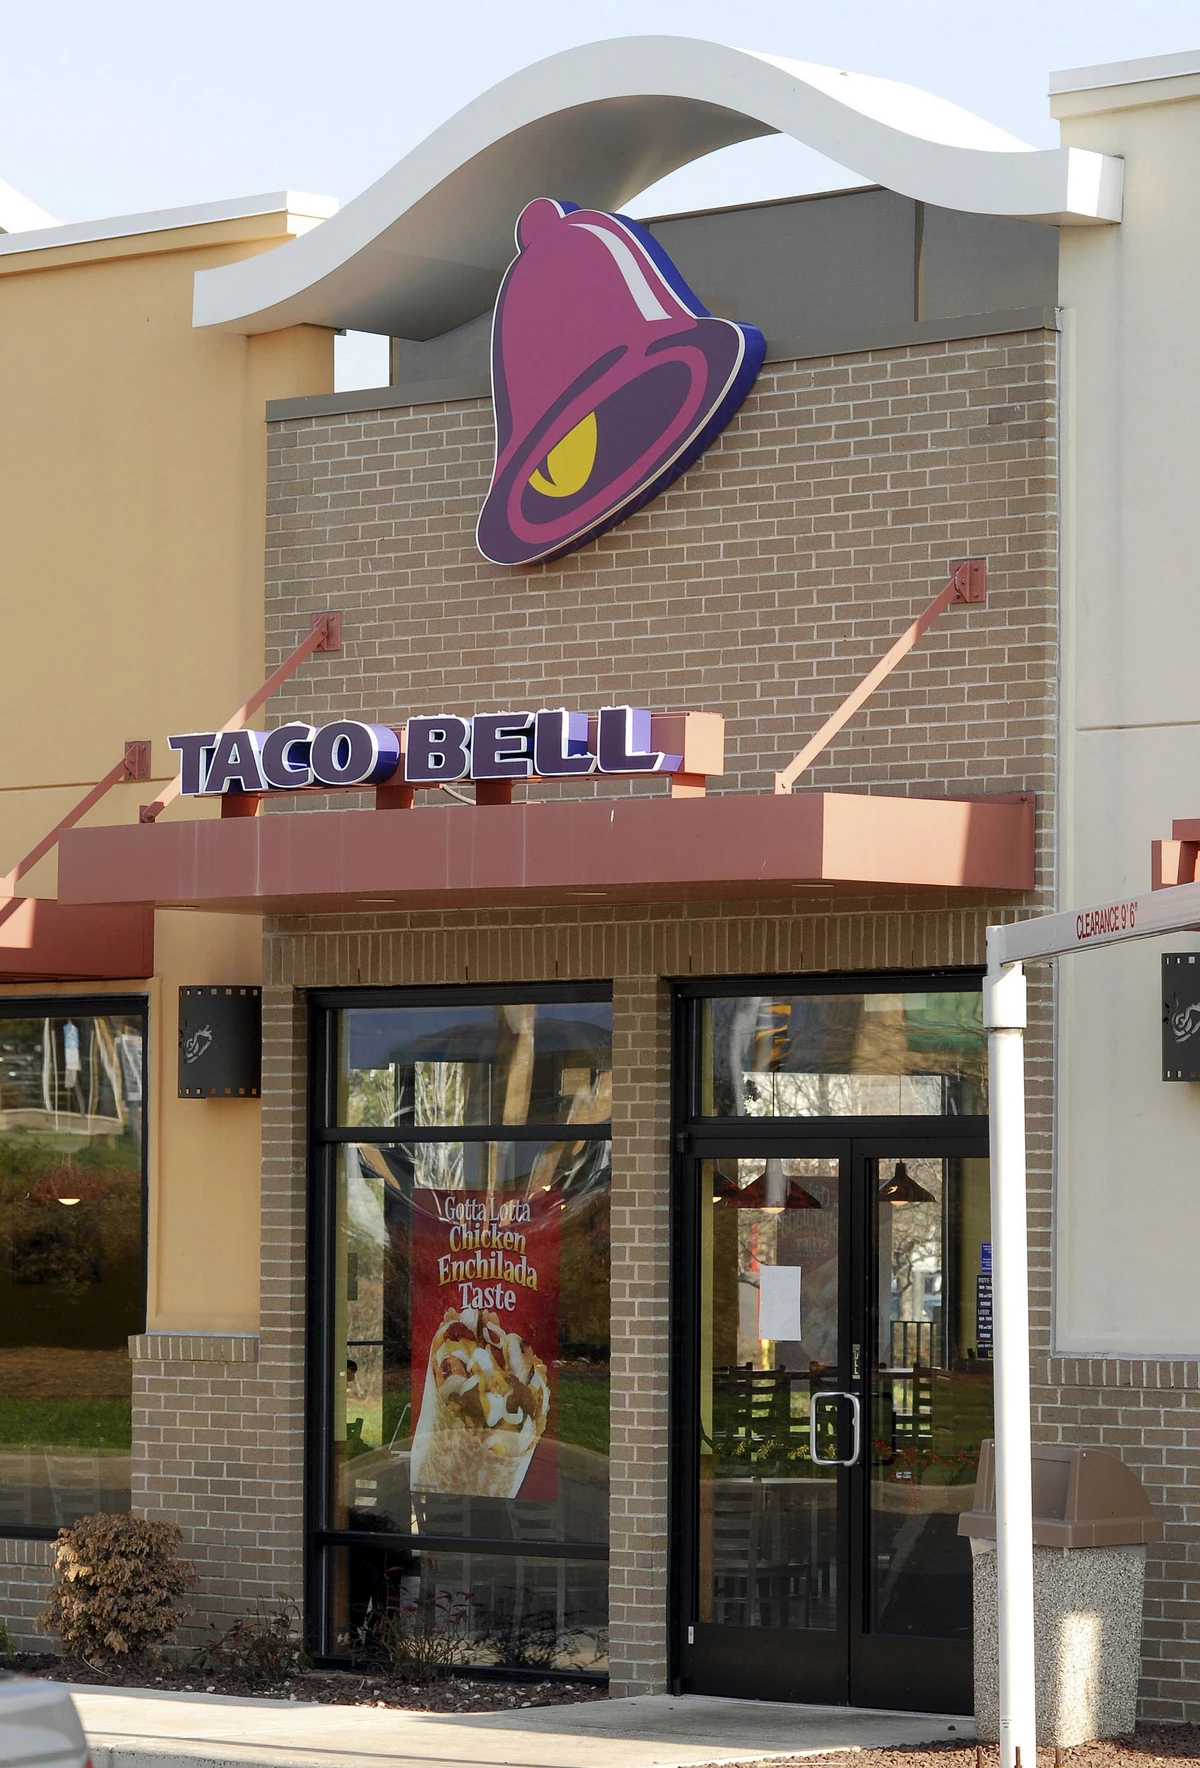 This Michigan Taco Bell is The Top Rated Restaurant in the World